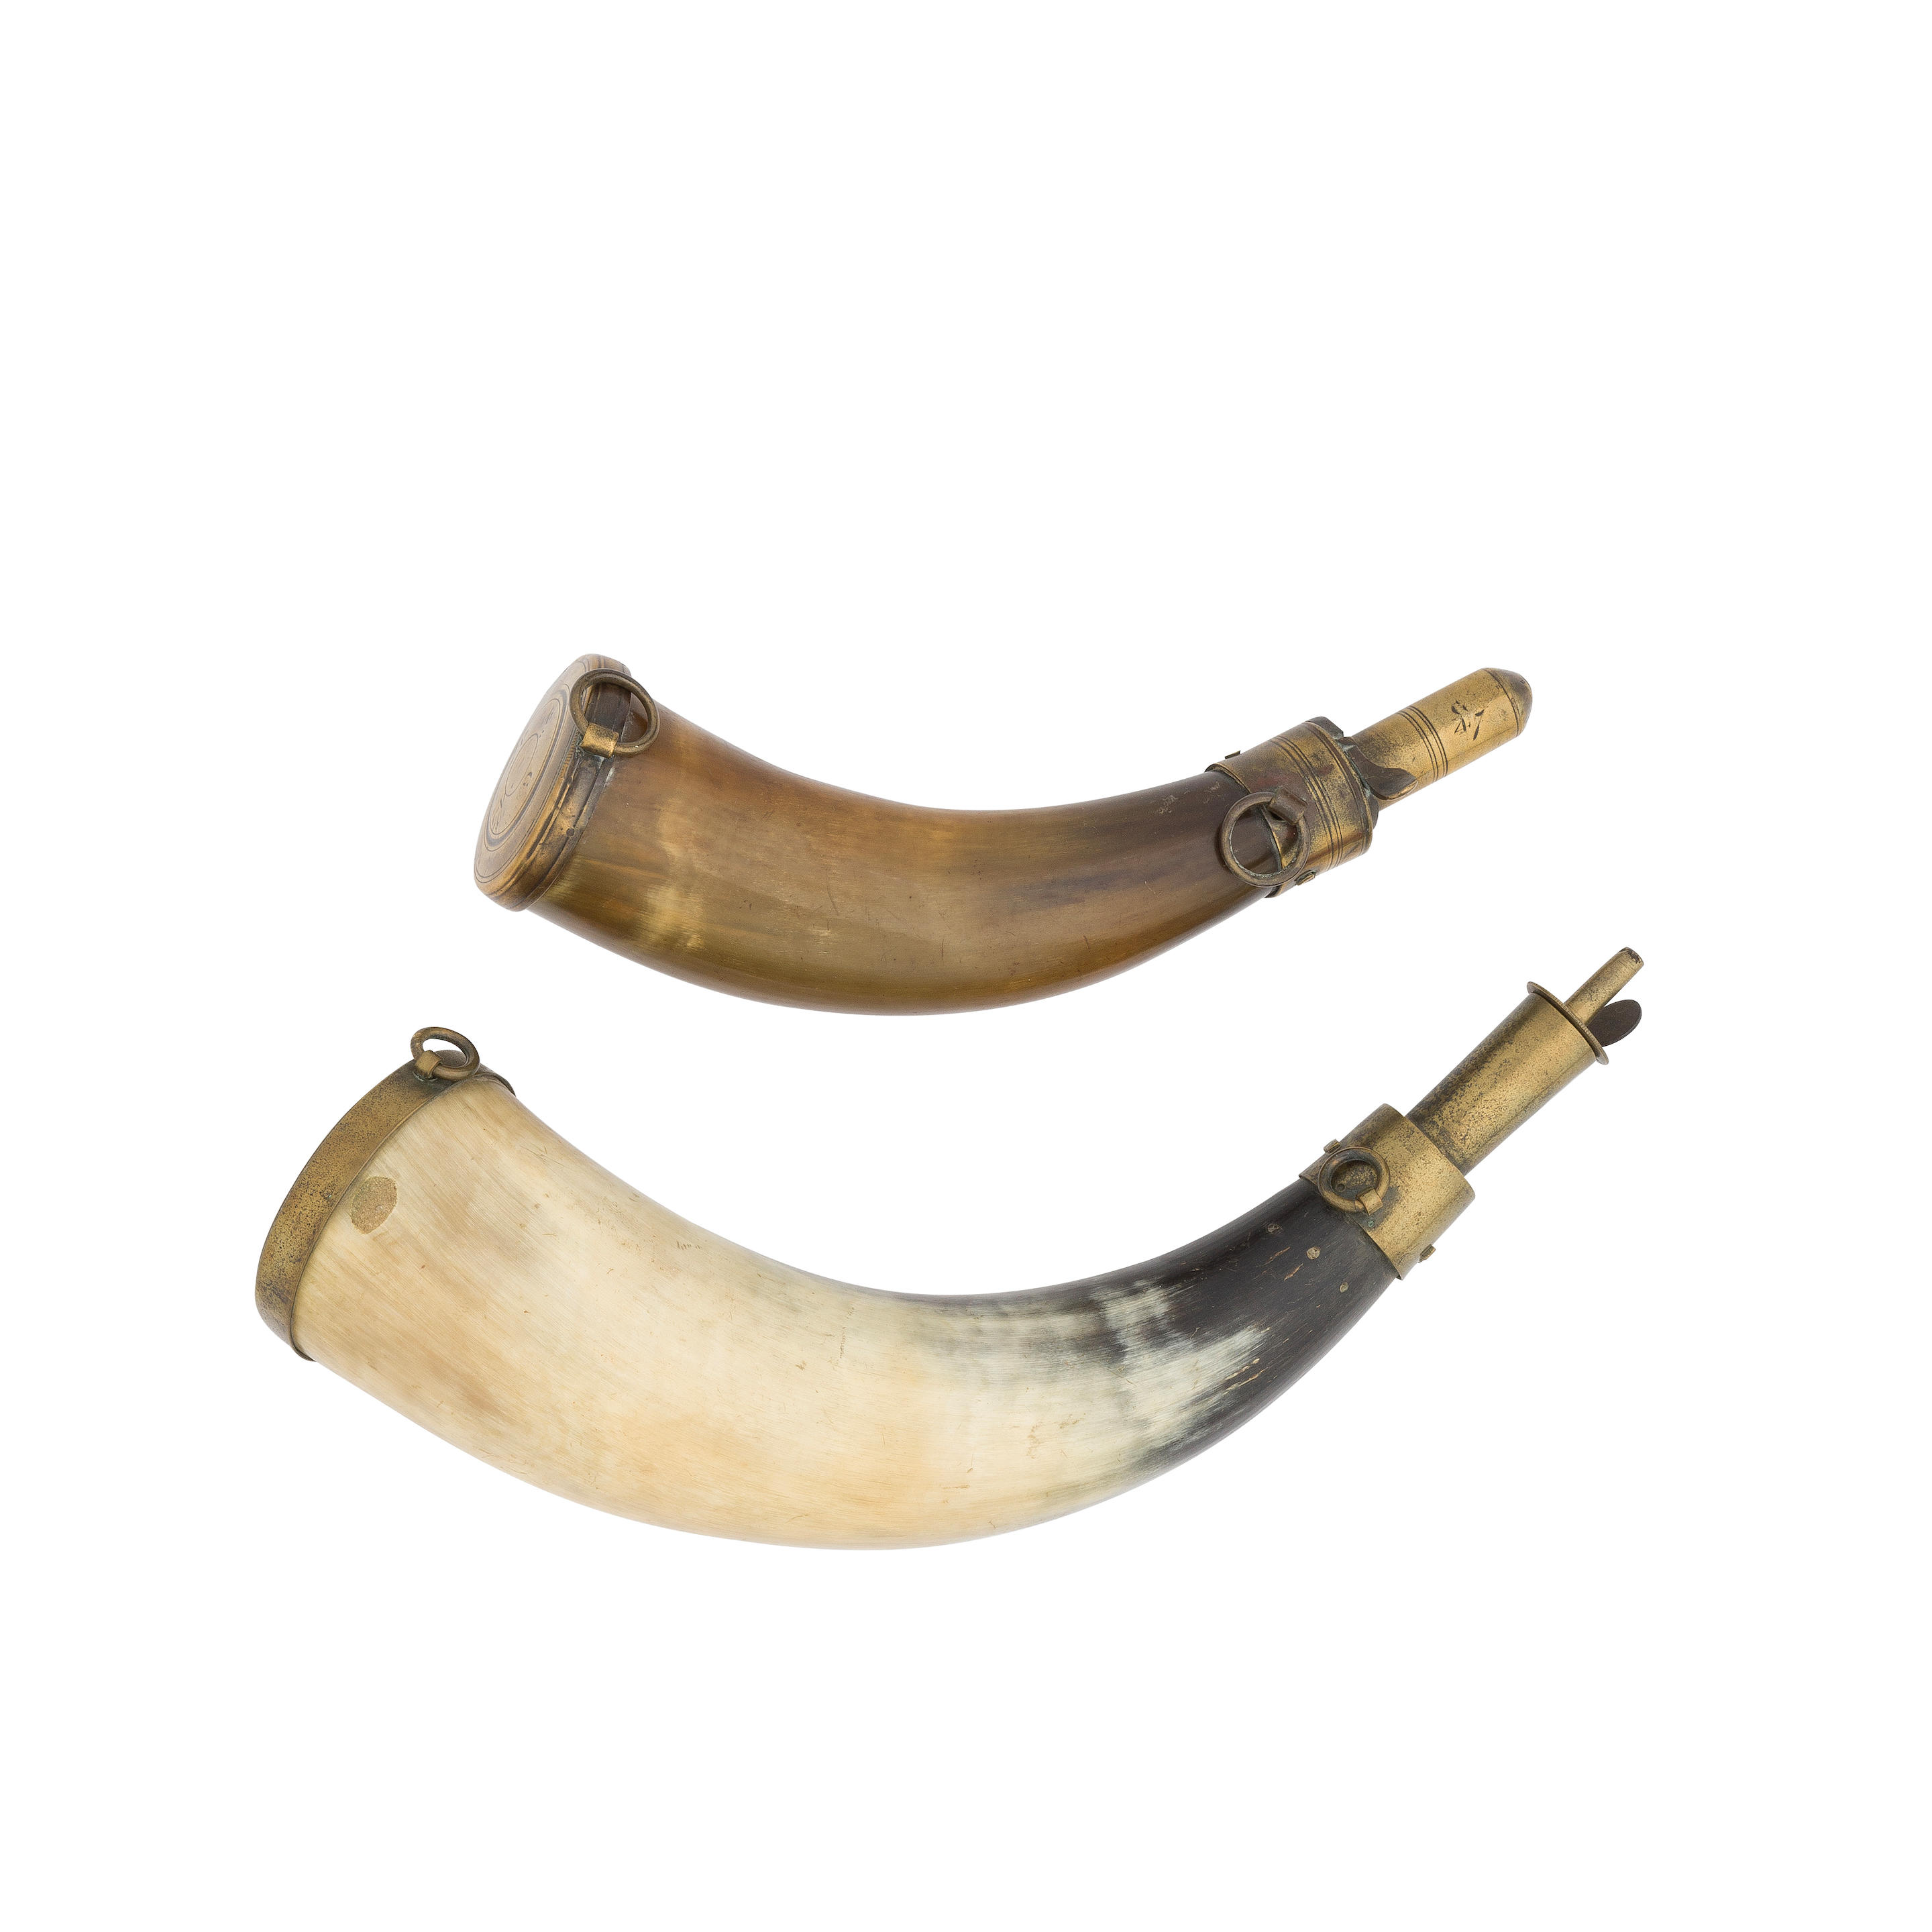 Bonhams : A Military Brass-Mounted Powder-Horn, And A Brass-Mounted Shot- Horn Of The Percy Volunteers